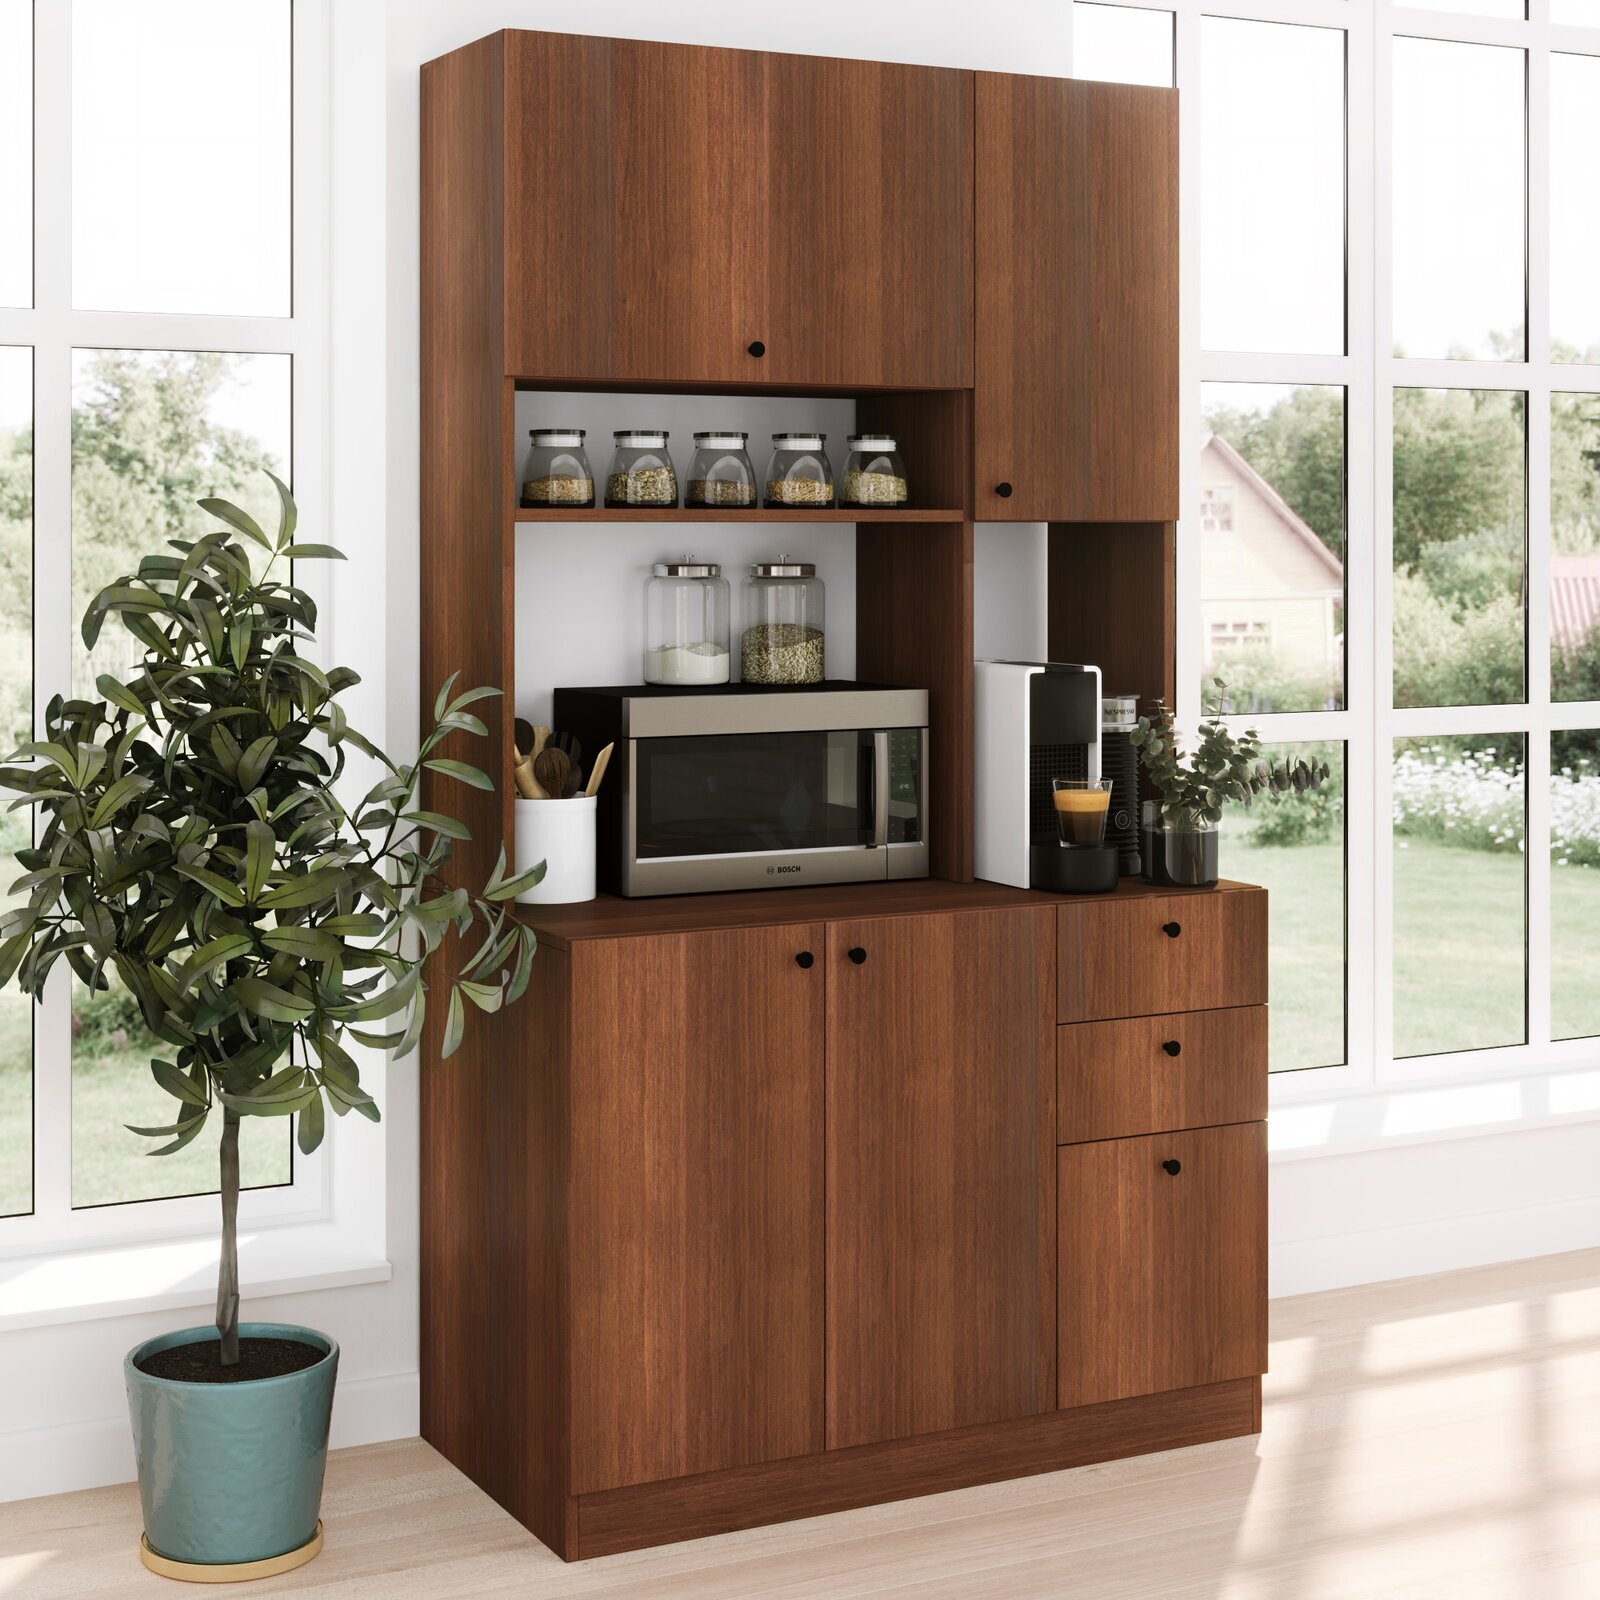 Freestanding cabinet with space for appliances